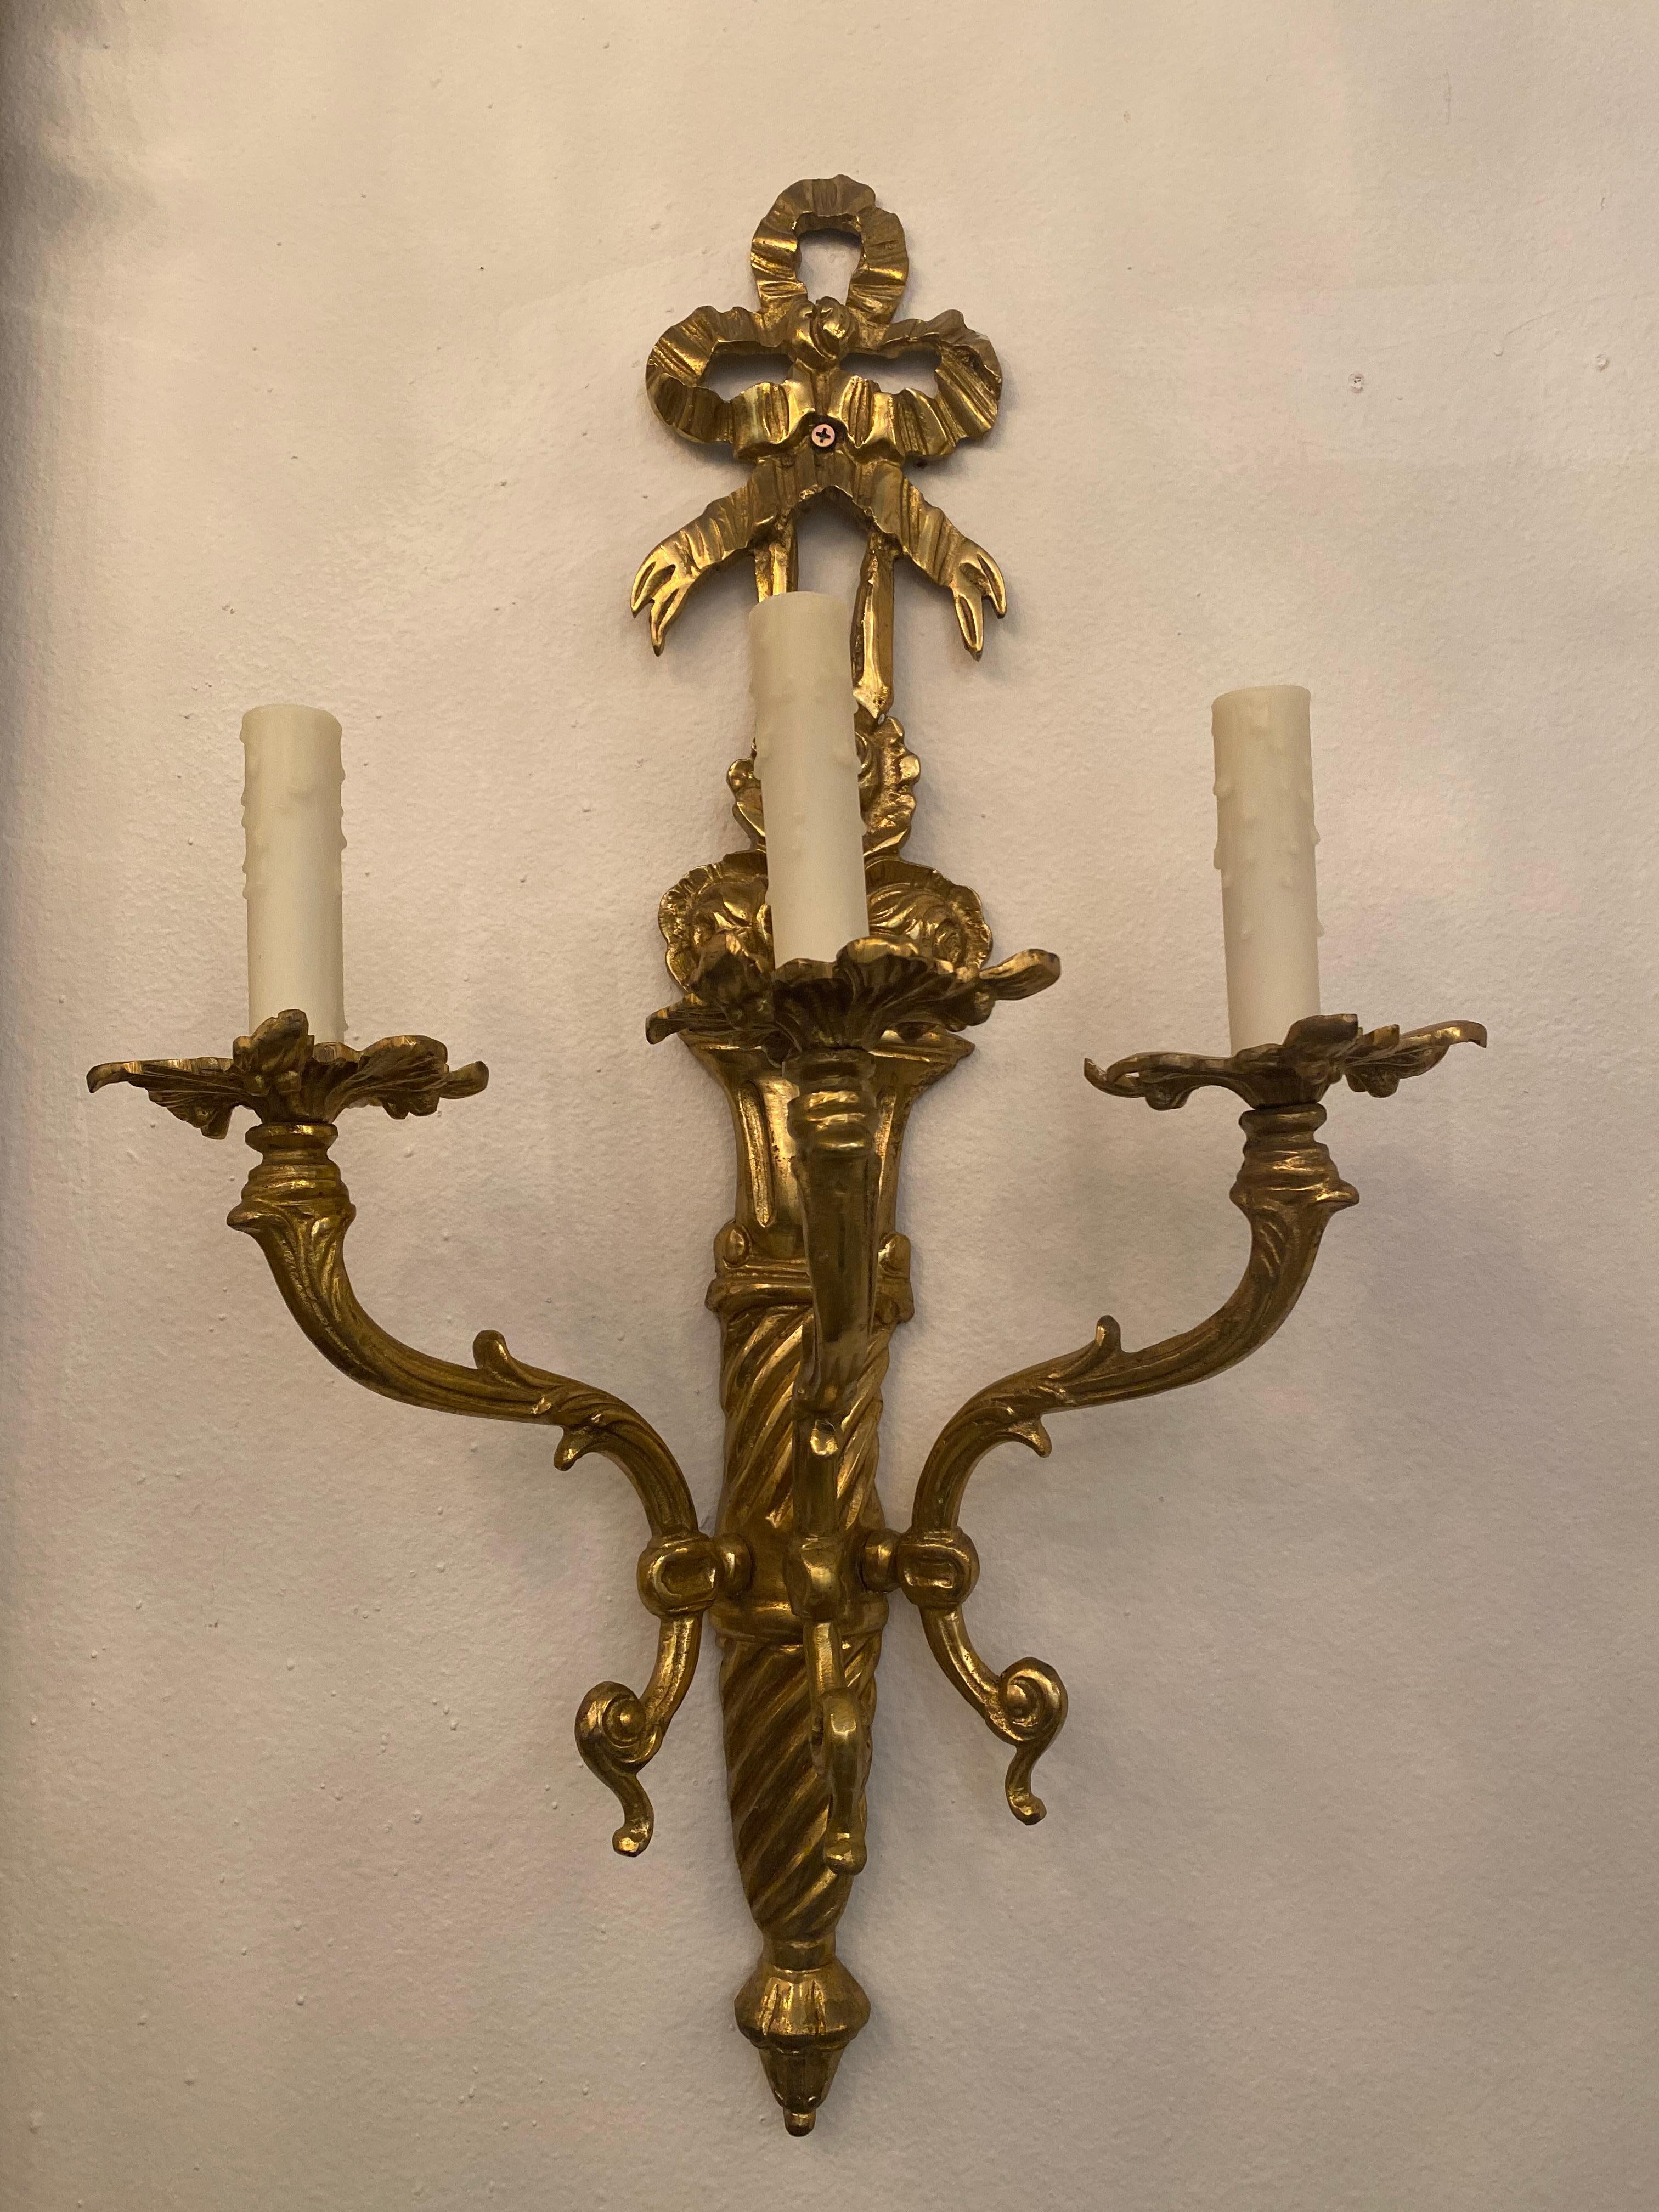 Neoclassic style gilt gold wall sconces, one pair 3 lights each in excellent conditions, from 19th century.